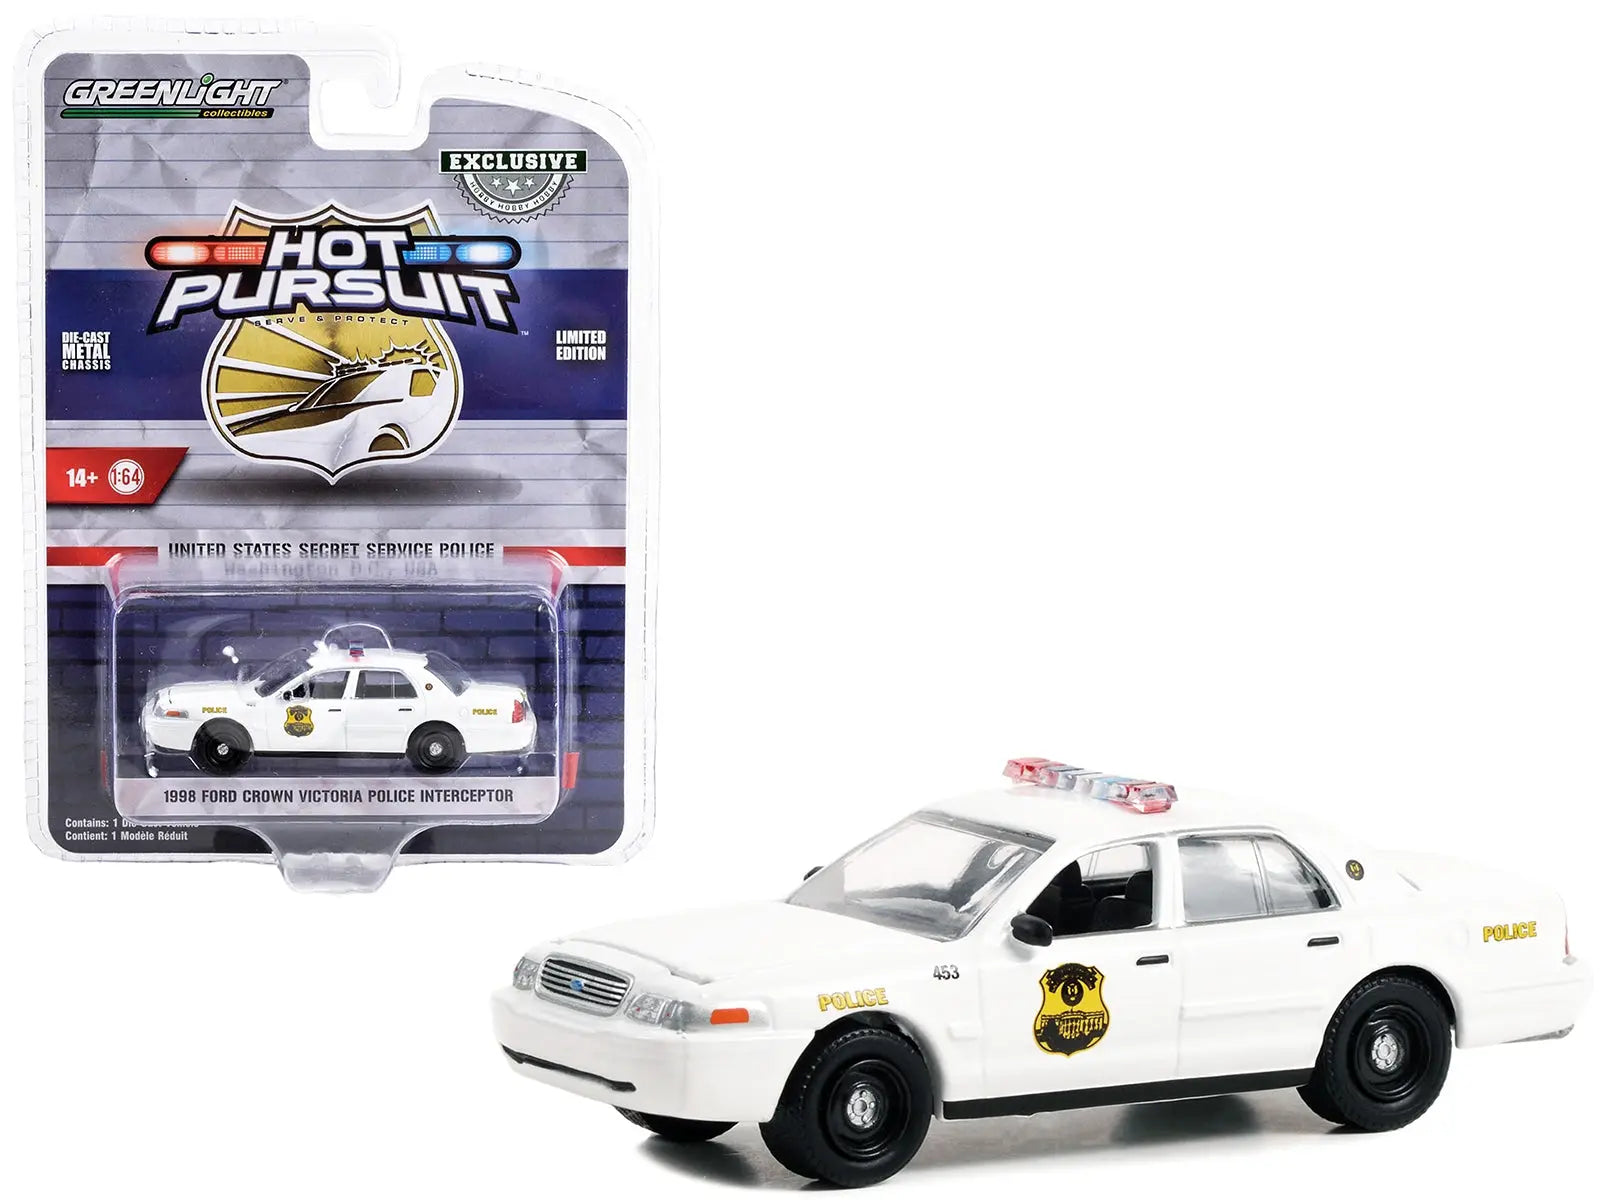 1998 Ford Crown Victoria Police Interceptor White "United States Secret Service Police" Washington DC "Hot Pursuit" Special Edition 1/64 Diecast Model Car by Greenlight Greenlight